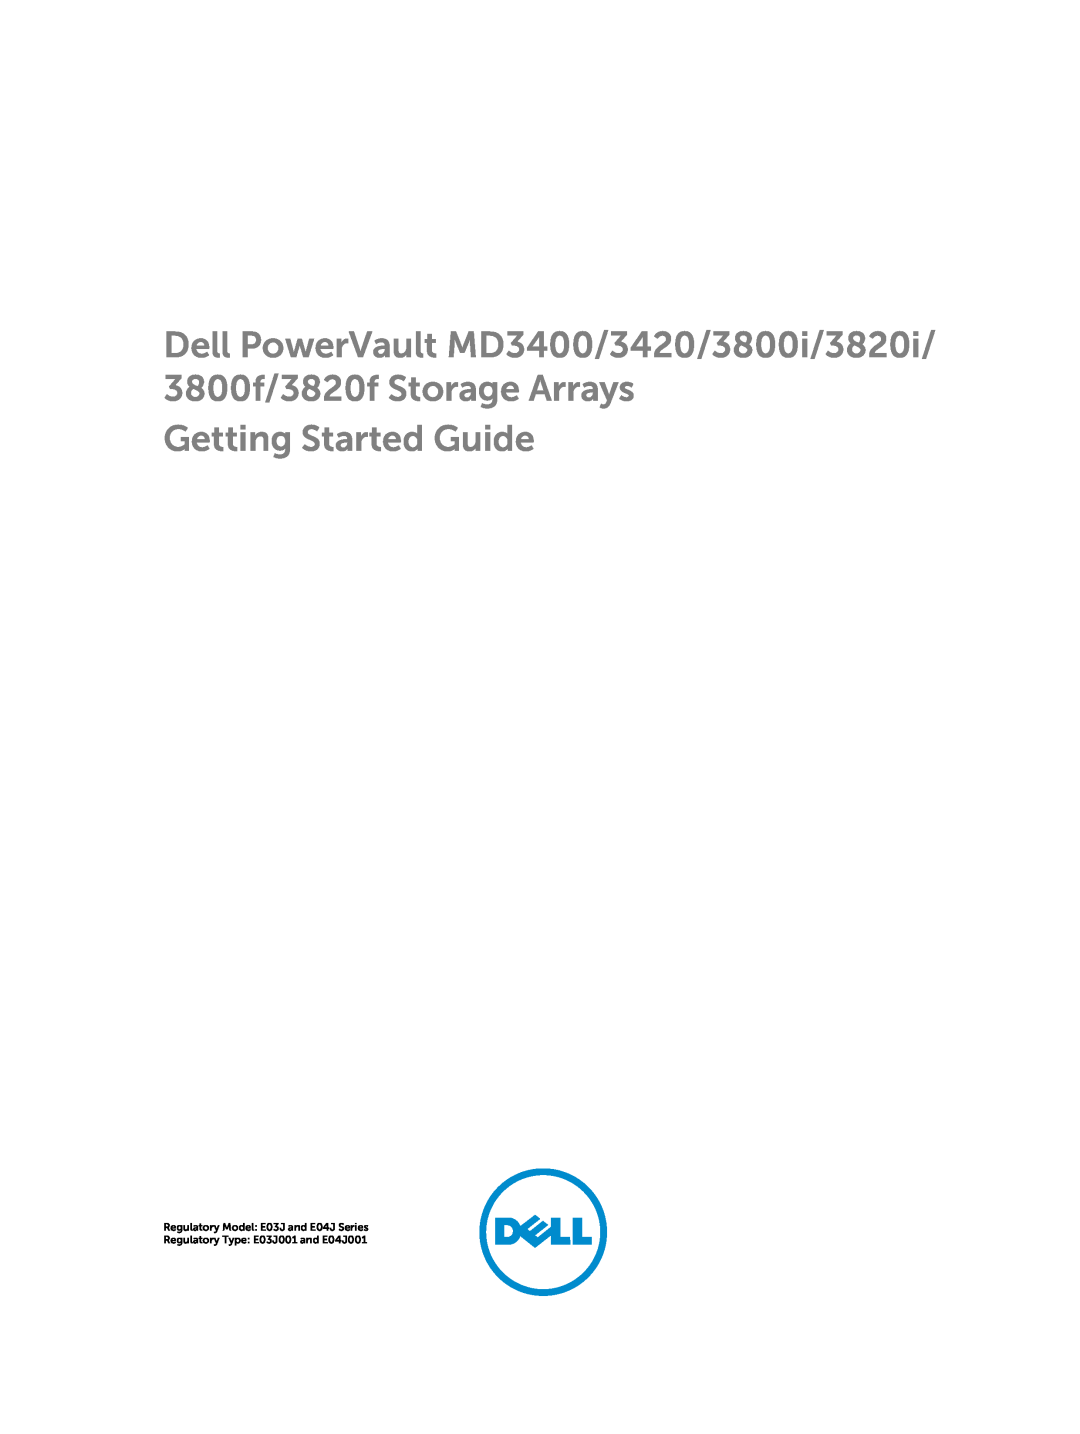 Dell manual Dell PowerVault MD3800f and MD3820f Series Storage Arrays, Deployment Guide 